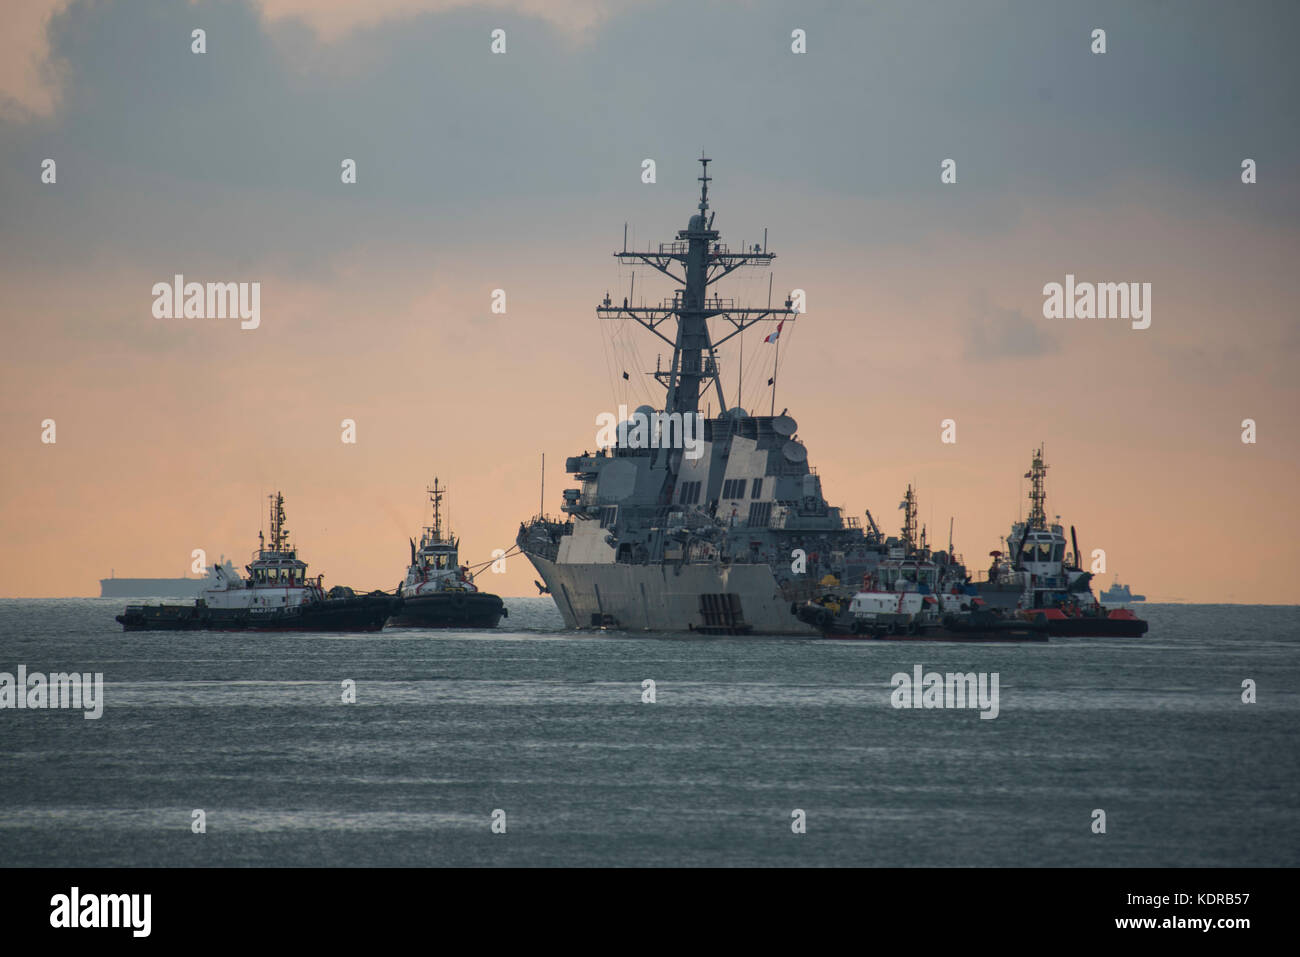 A tug boat tows the U.S. Navy Arleigh Burke-class guided-missile destroyer USS John S. McCain away from the Changi Naval Base pier at sunset October 5, 2017 in Changi, Singapore. Stock Photo